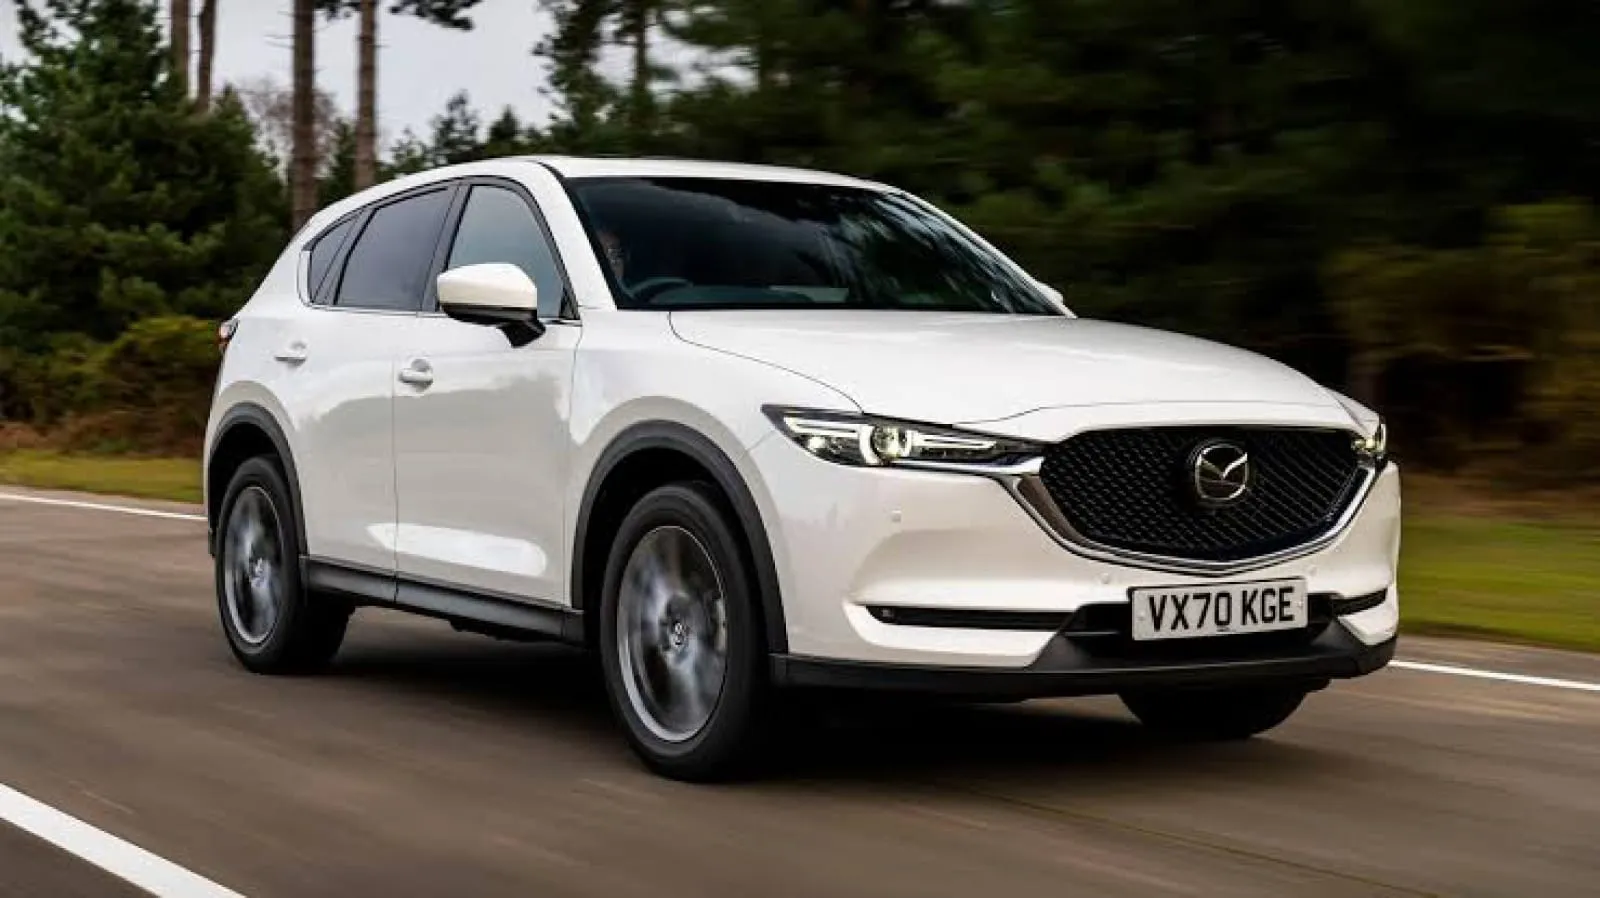 Mazda CX-5 For Hire Lease Rental in Kenya Best prices all cars available